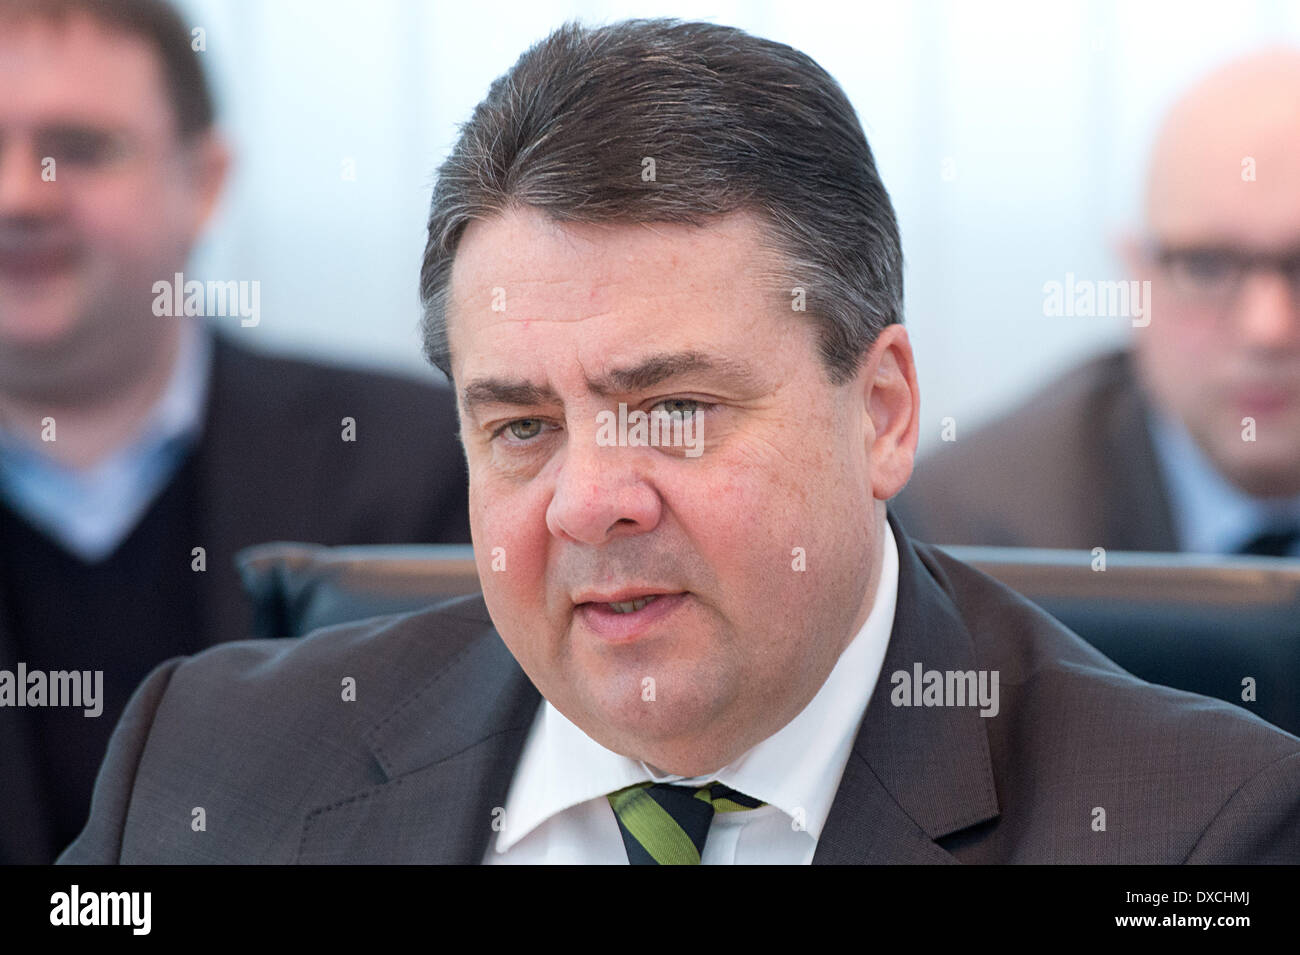 Berlin, Germany. 24th Mar, 2014. Federal Minister of Economics and Energy and chairman of the SPD, Sigmar Gabriel, attends a Presidium meeting of the SPD in Berlin, Germany, 24 March 2014. Photo: MAURIZIO GAMBARINI/dpa/Alamy Live News Stock Photo